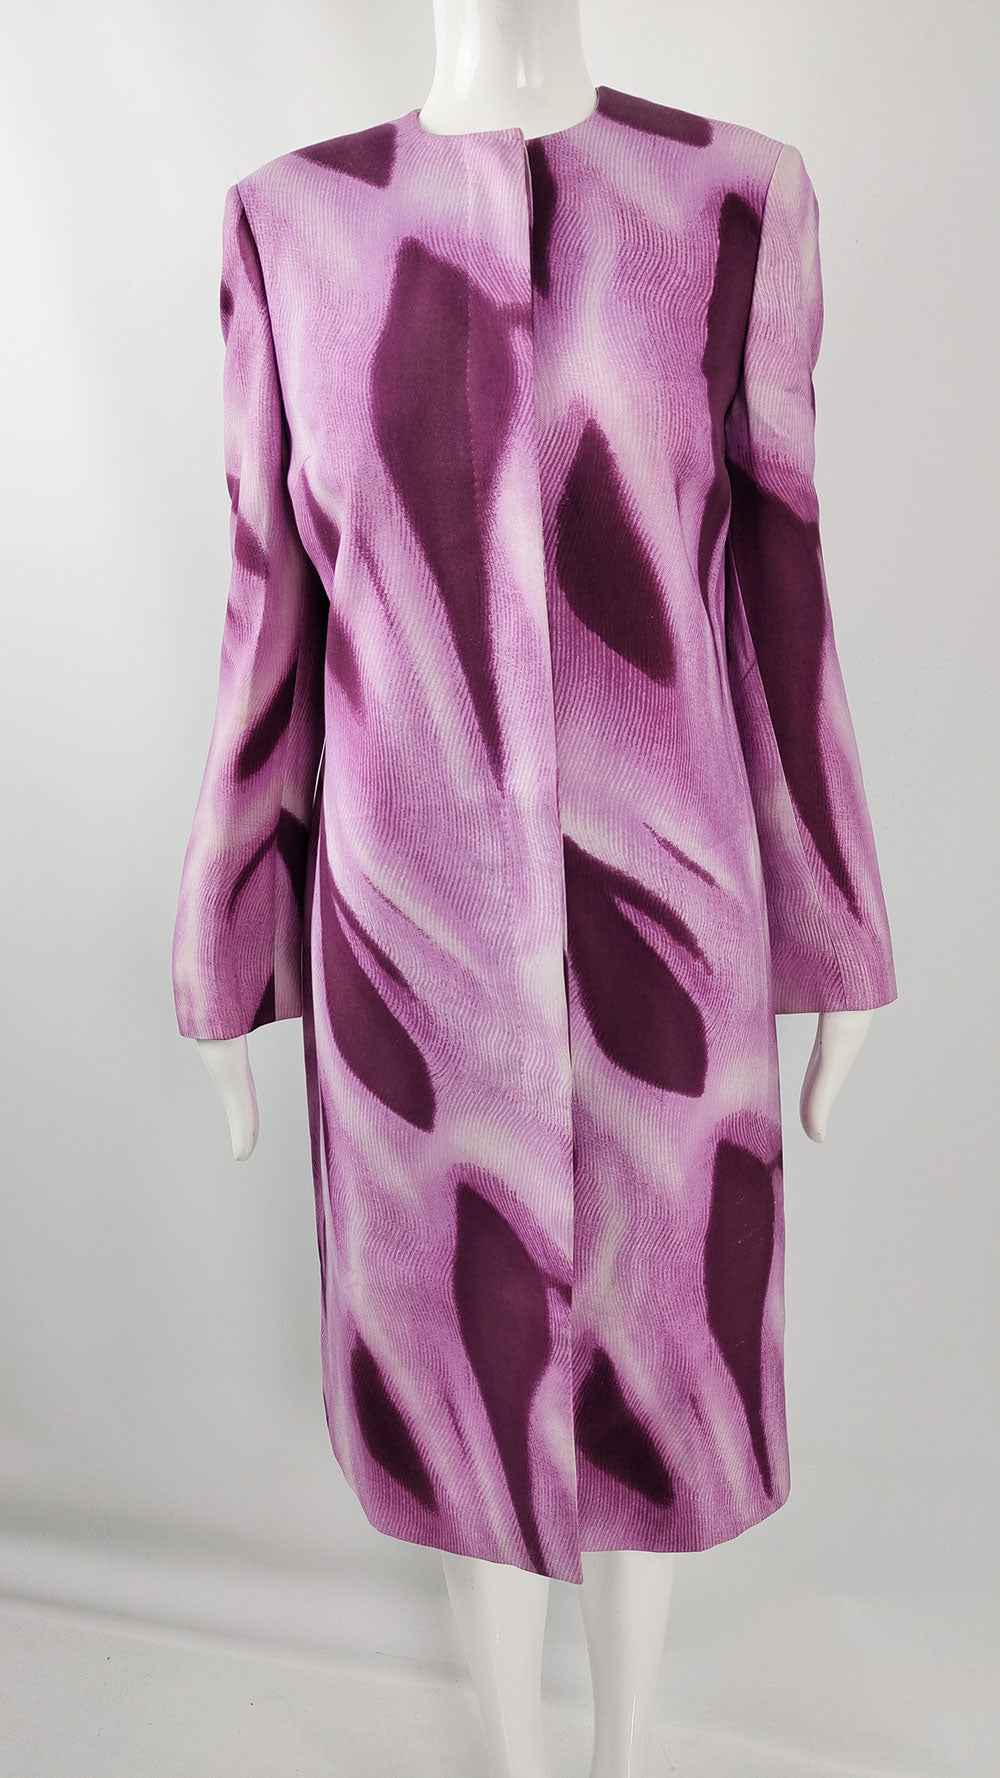 A purple abstract printed vintage Gianni Versace lightweight coat.